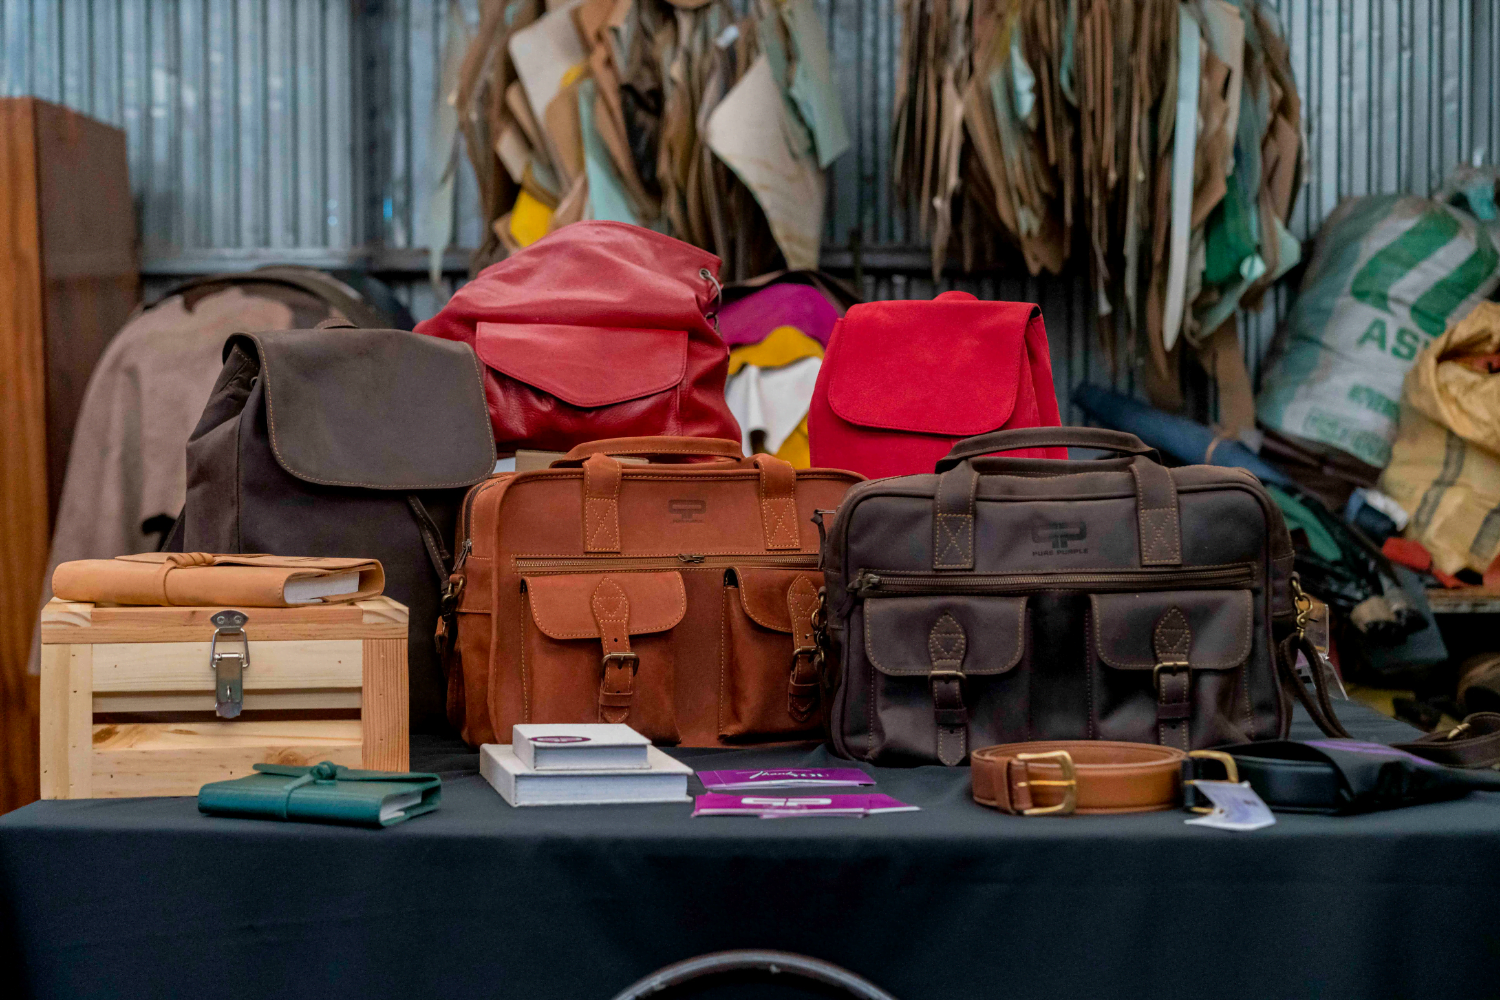 A table with a dark brown backpack, two red leather backpacks, a light brown satchel bag and a dark brown satchel bag.